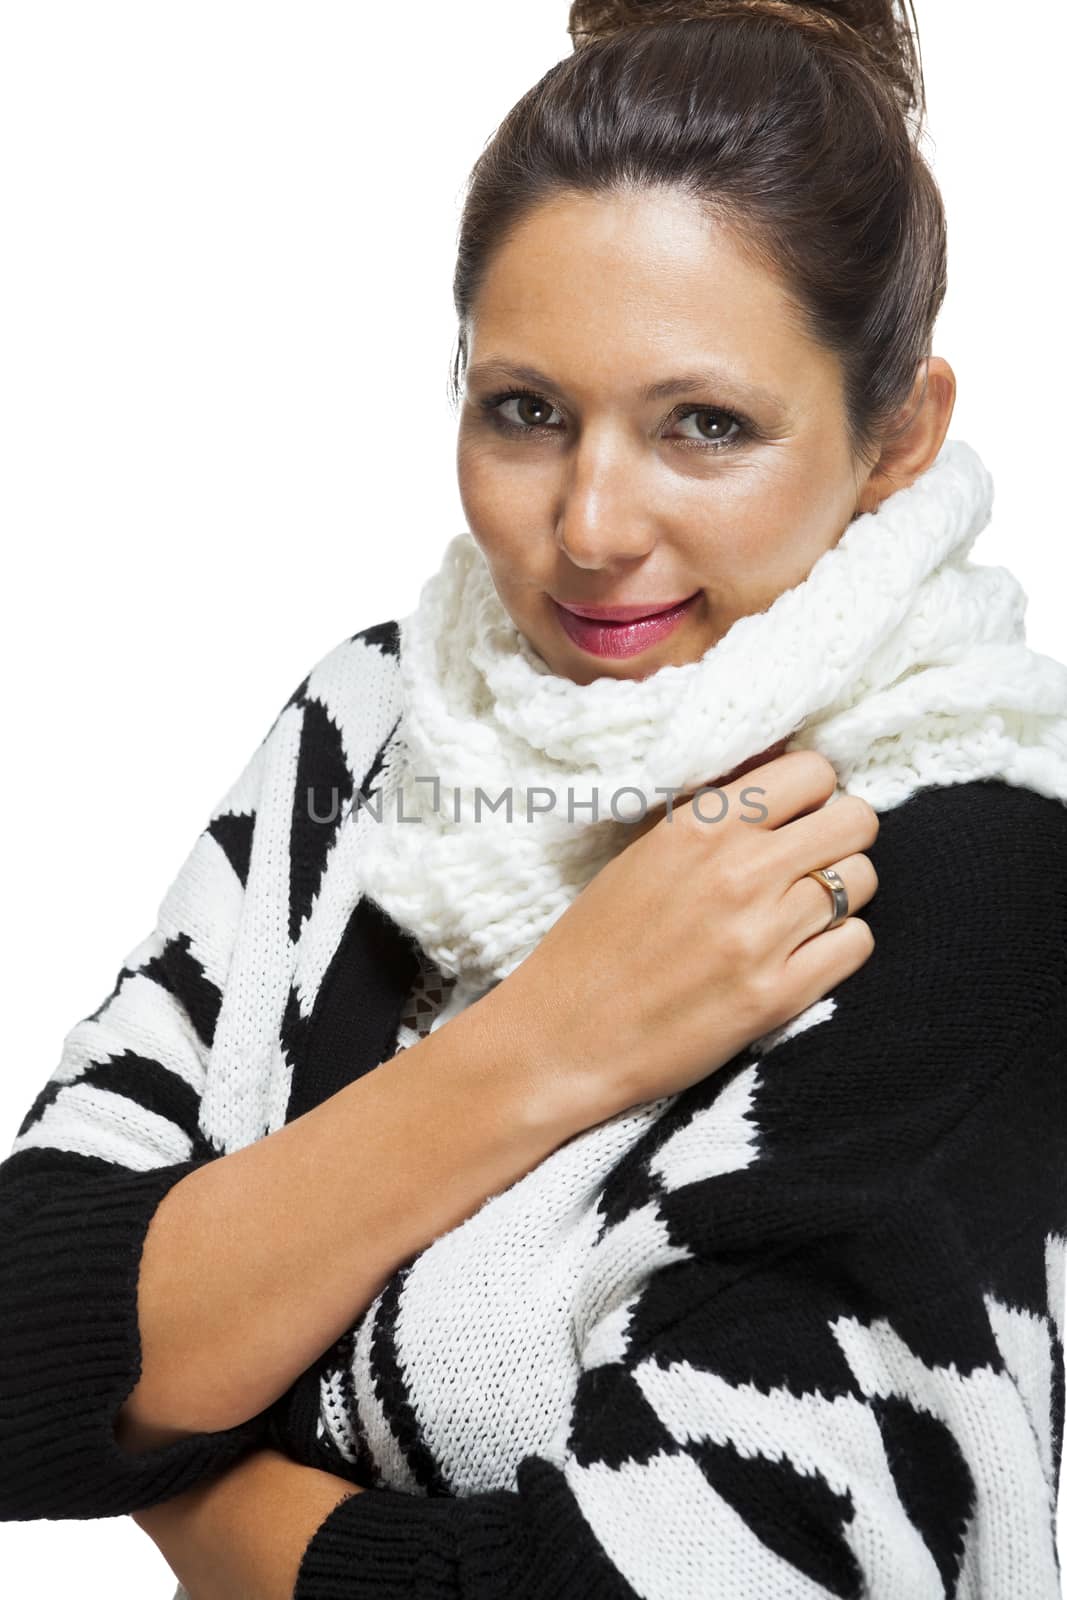 Attractive elegant woman in winter fashion snuggling down into her white scarf and black and white jumper to ward off the cold winter weather, on white